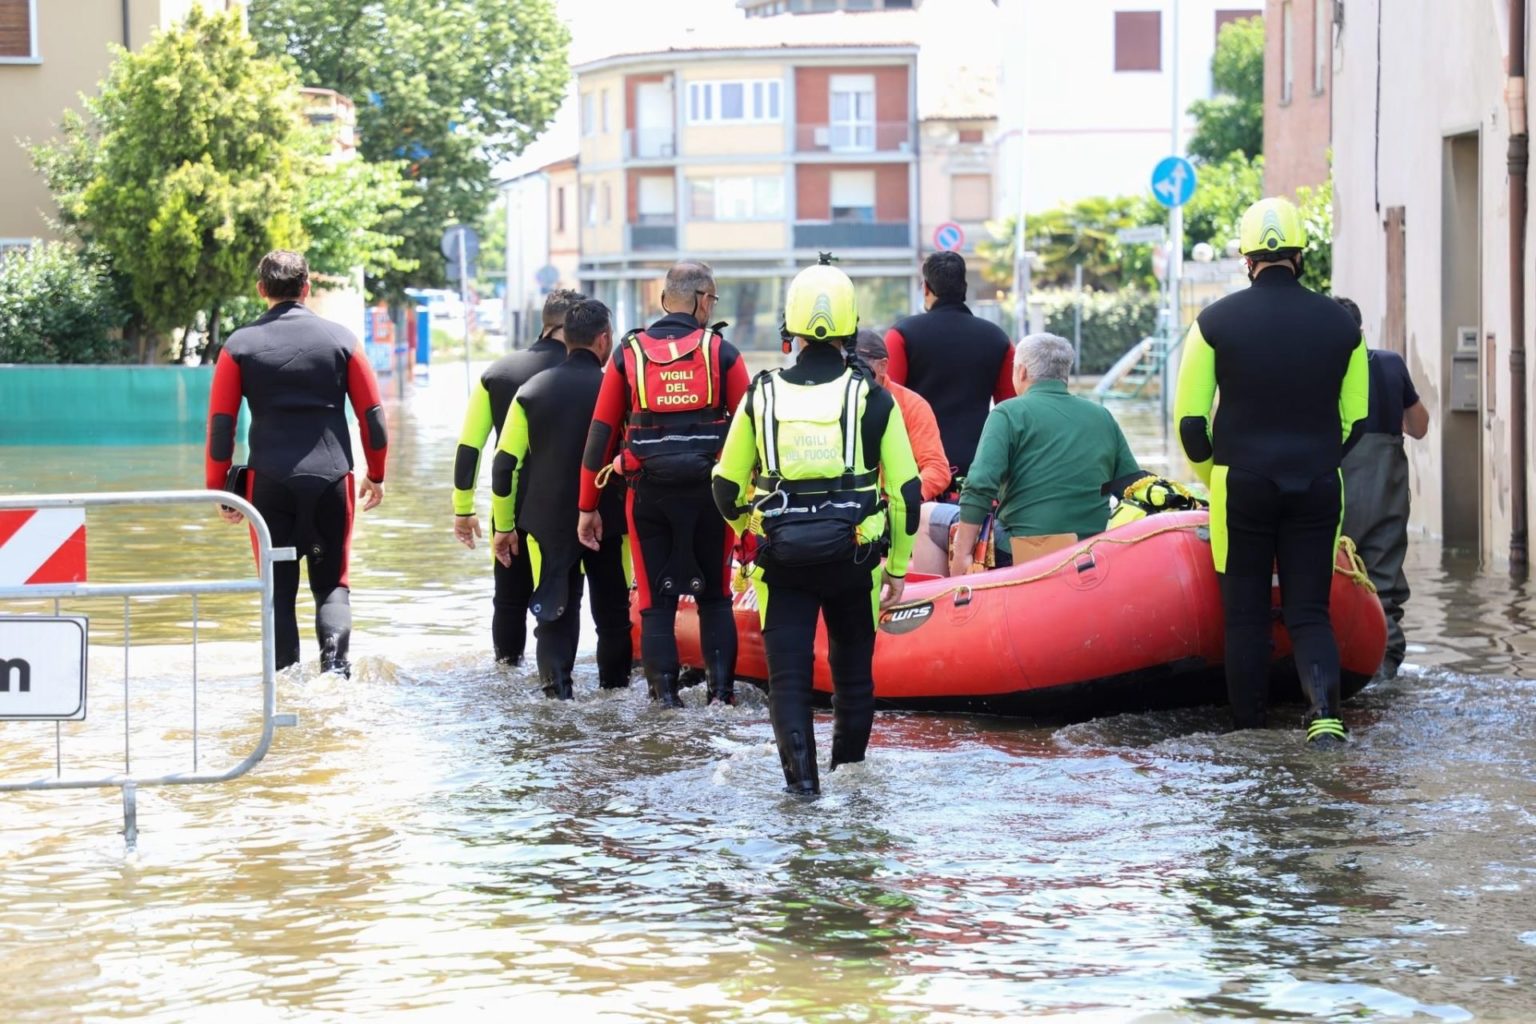 Flooding in Northern Italy's Emilia-Romagna has killed 15 people and displaced thousands. Worldchefs' member FIC has responded with emergency food relief.